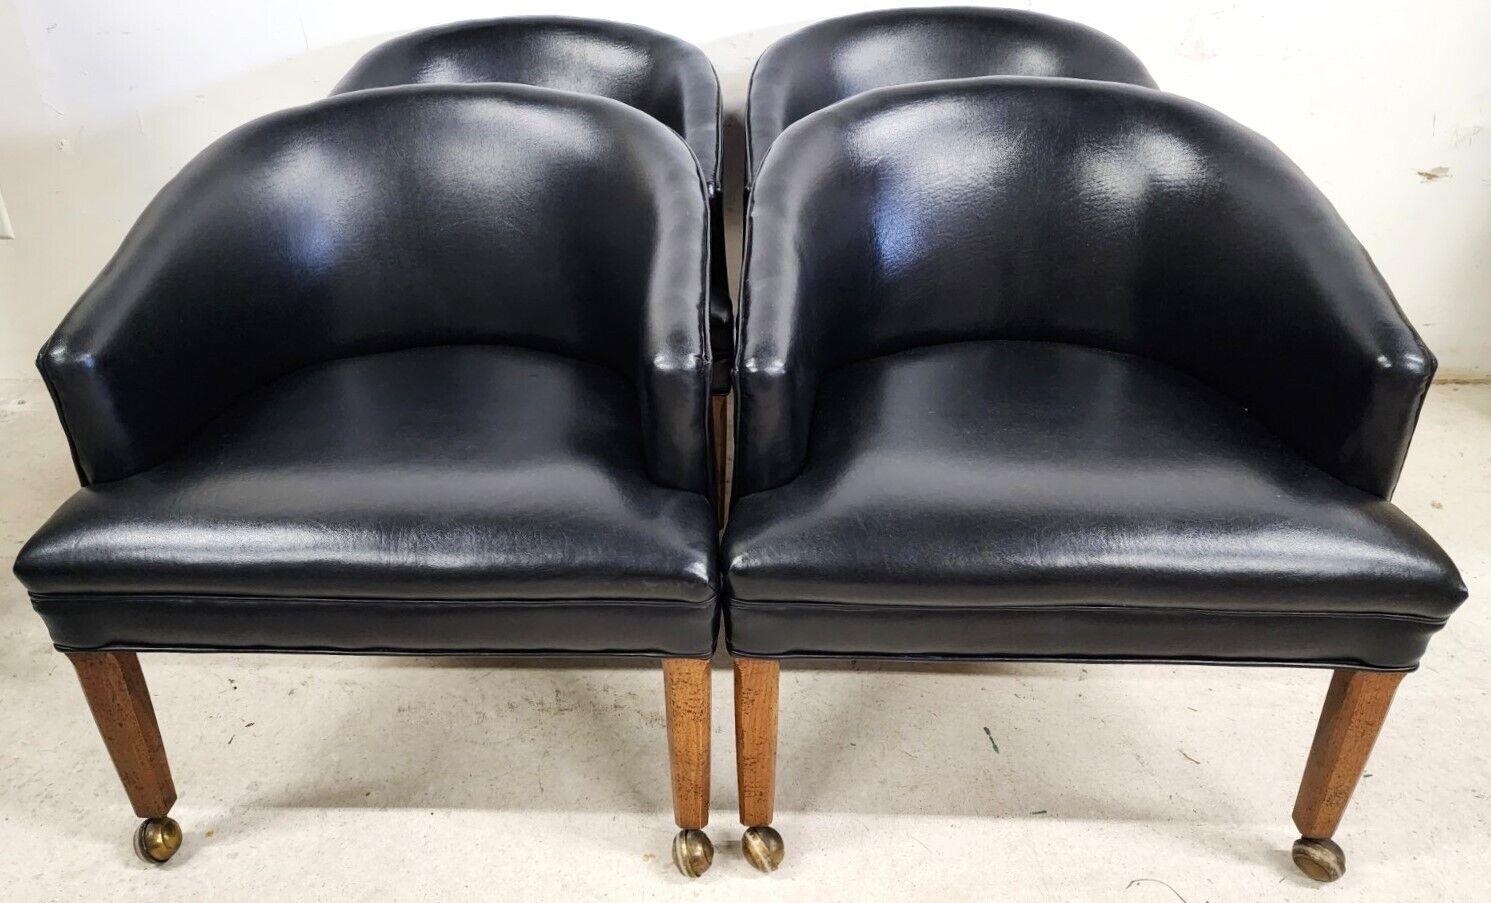 Offering One Of Our Recent Palm Beach Estate Fine Furniture Acquisitions Of A 
Set of 4 MCM Black Leather Game Dining Chairs Rolling 

Approximate Measurements in Inches
27